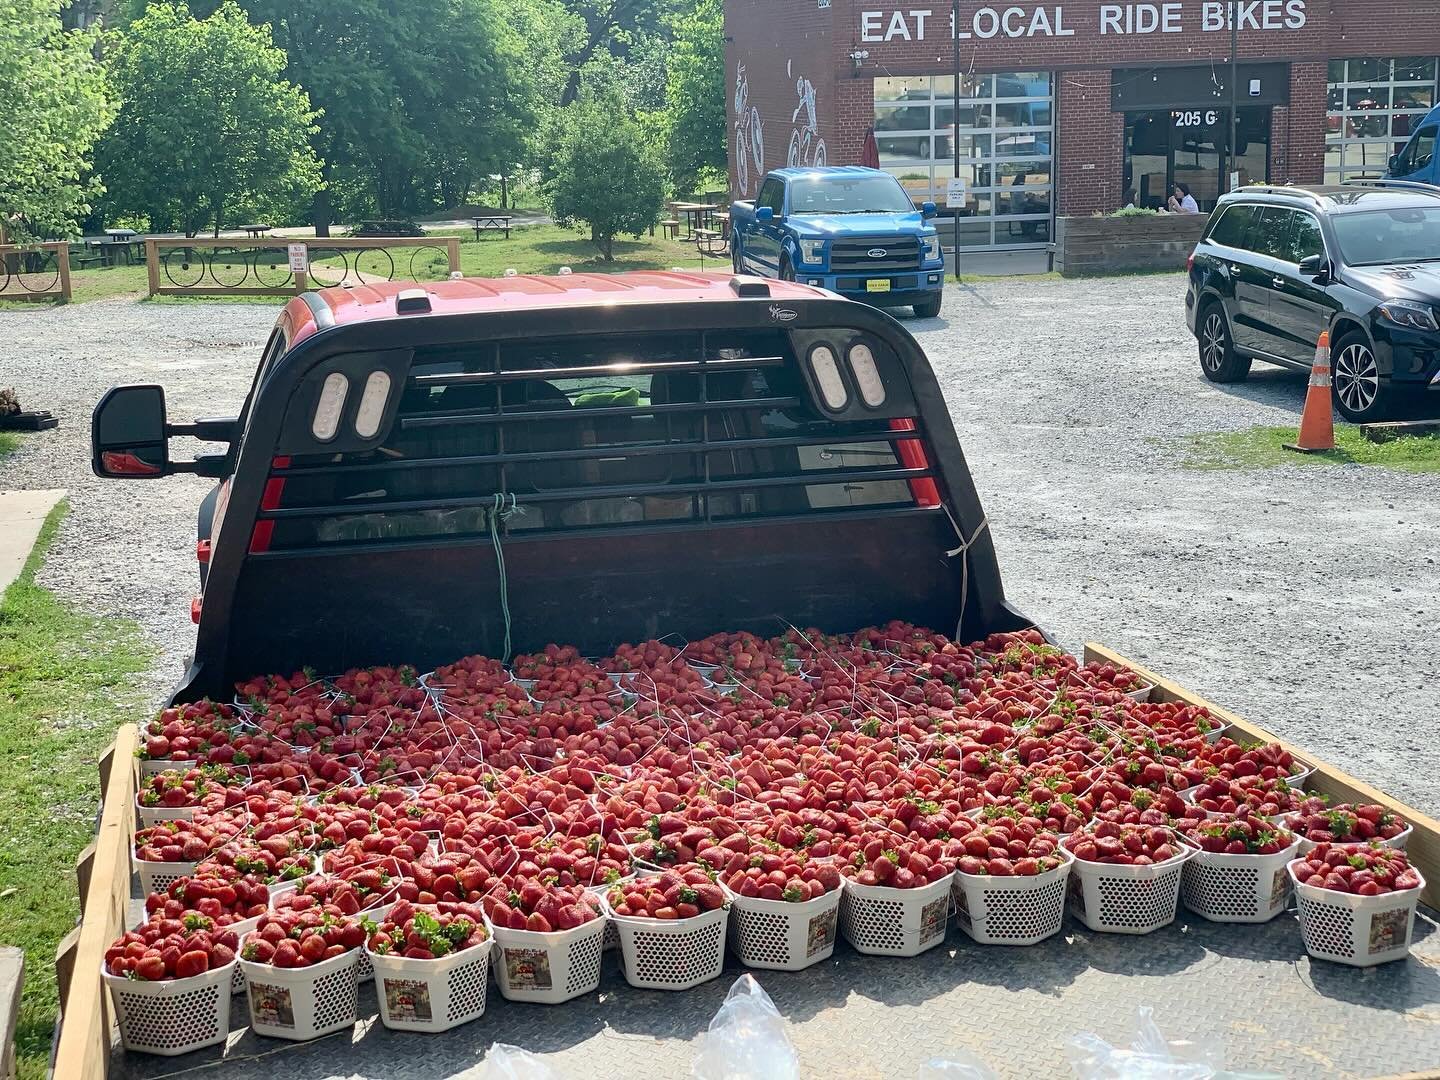 Fresh from the farm! Gallons and gallons of local strawberries are here!